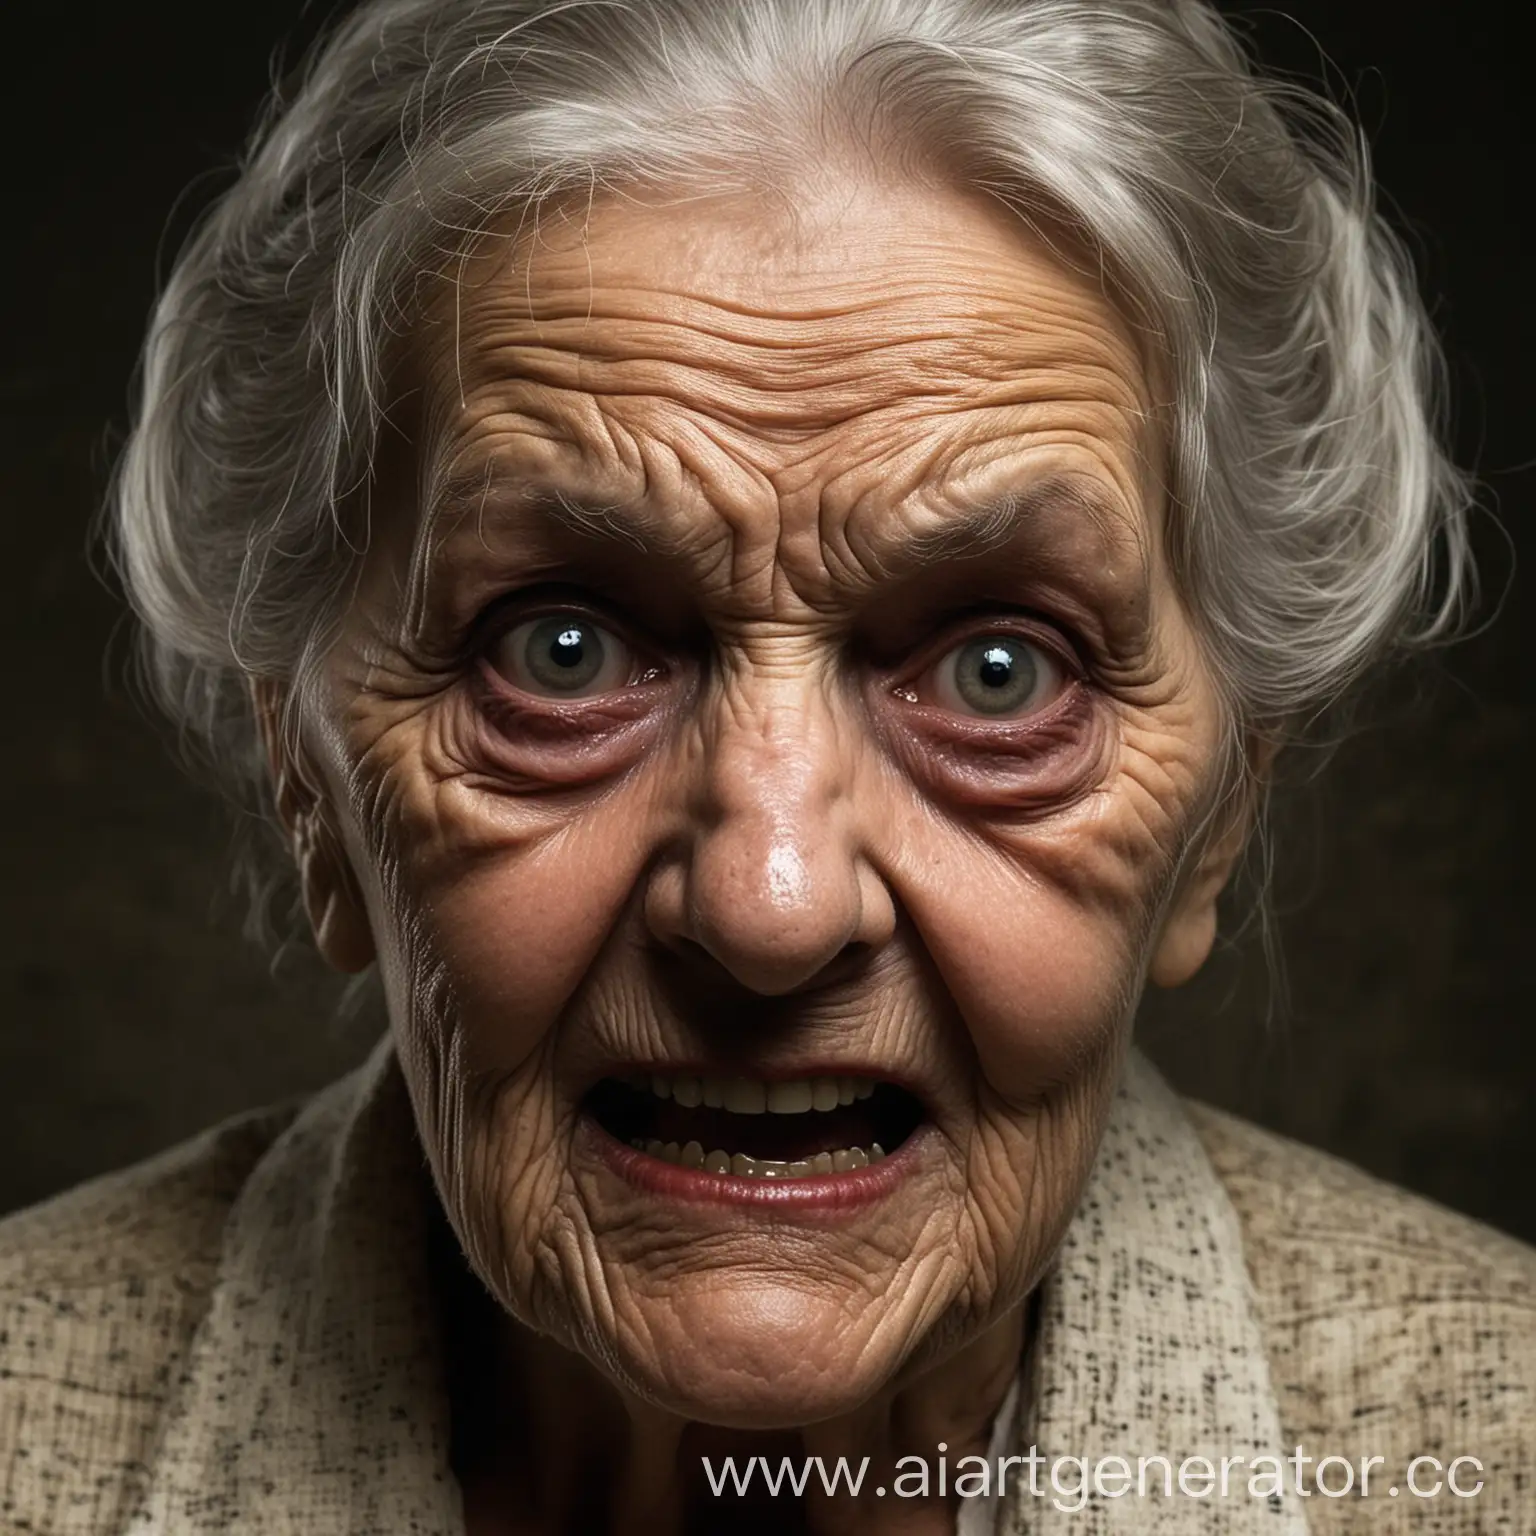 Eerie-and-Haunting-Portrait-of-a-Sinister-Grandmother-Figure